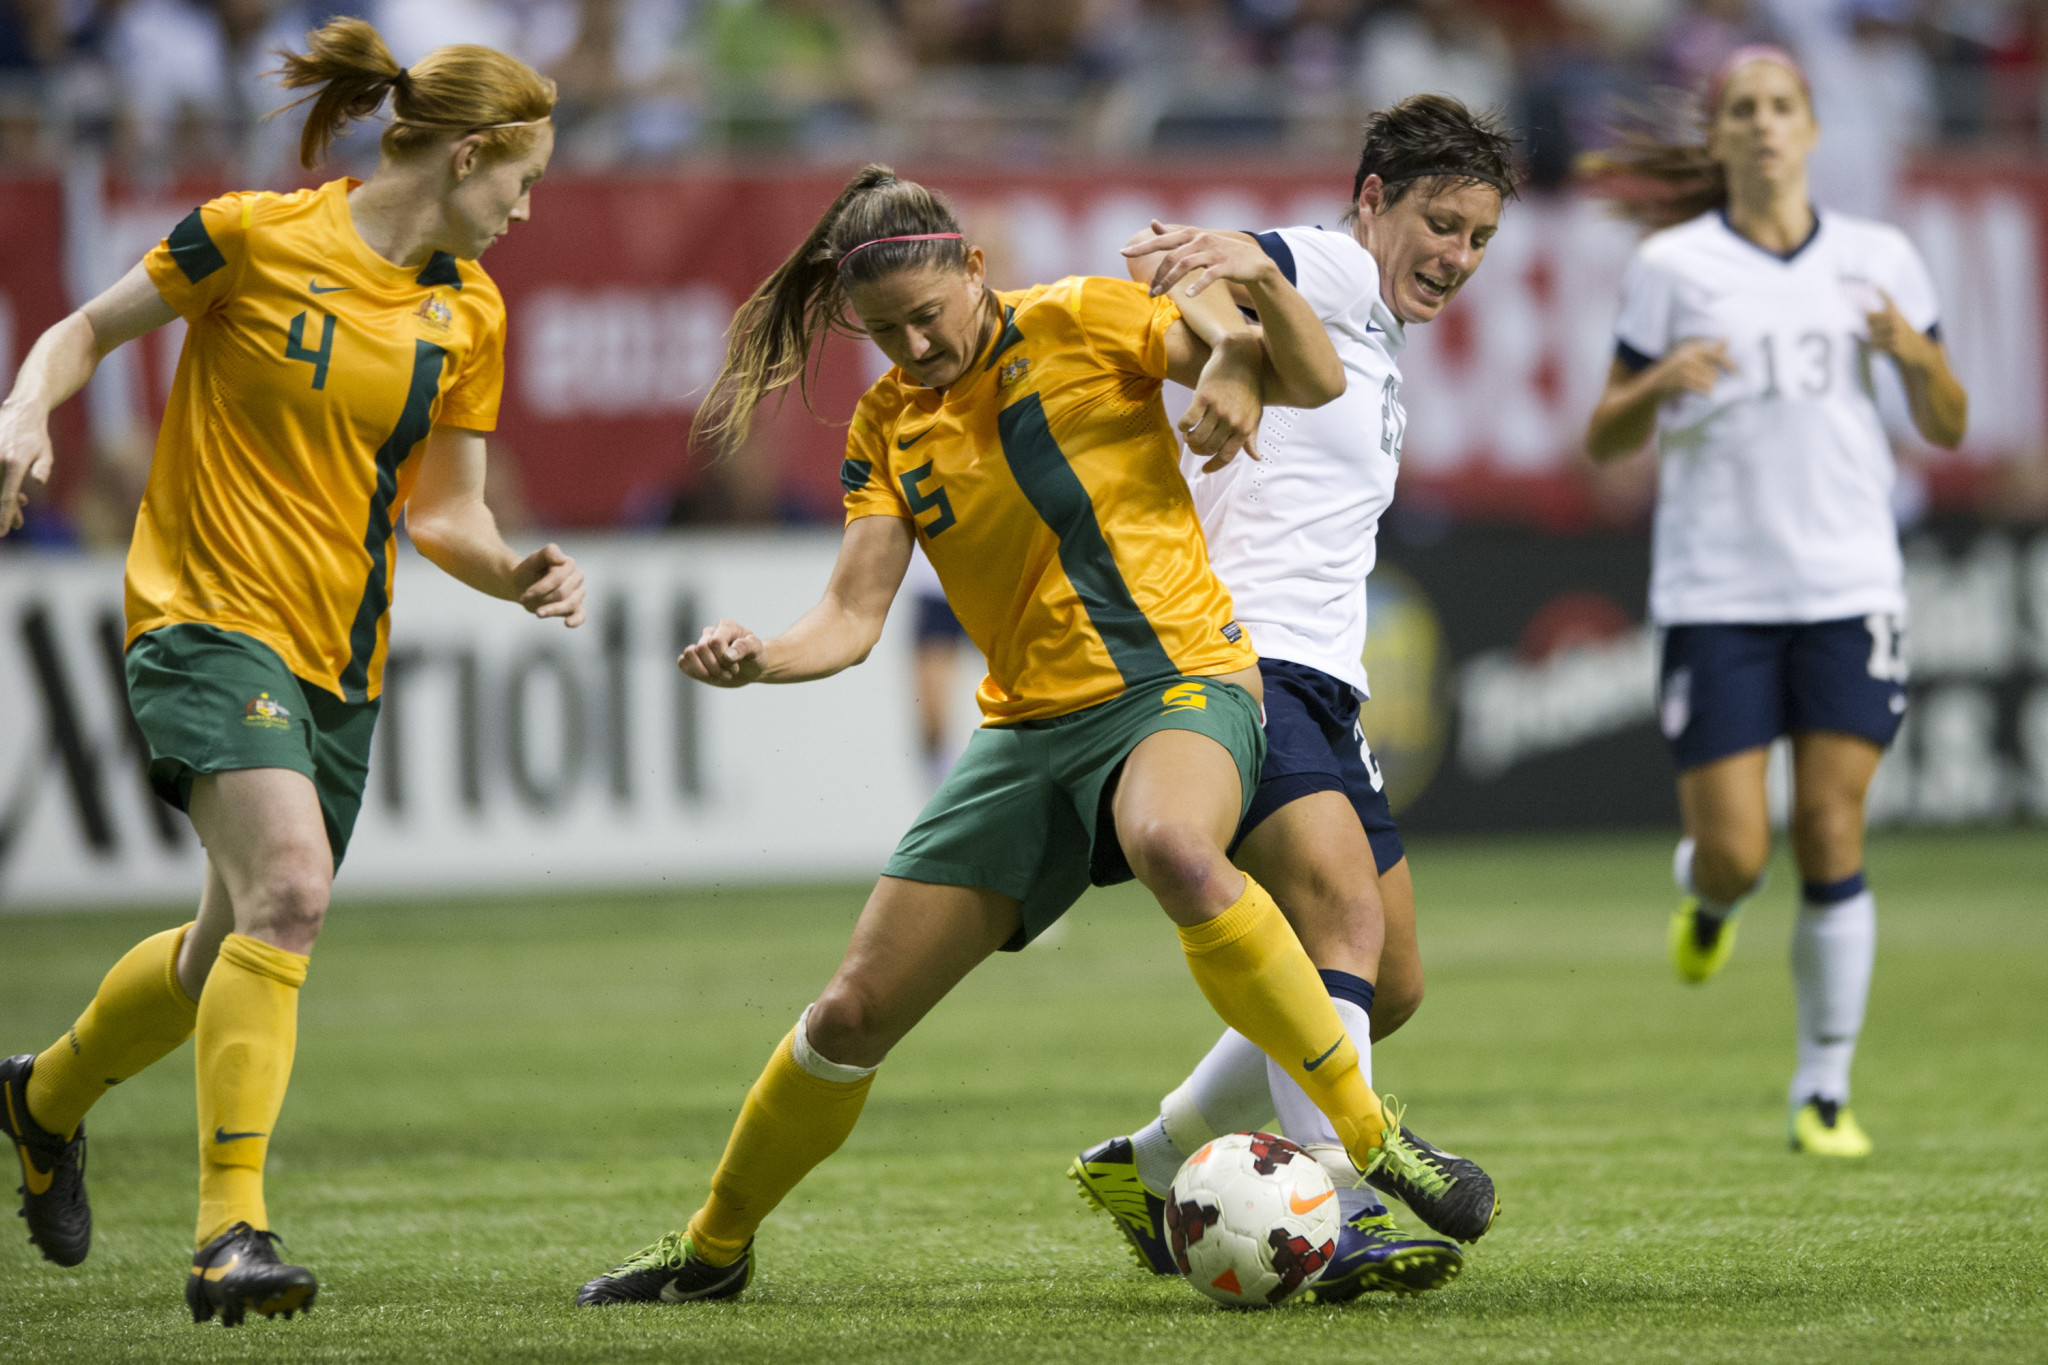 Australian Government release extra funding for 2023 FIFA Women's World Cup bid